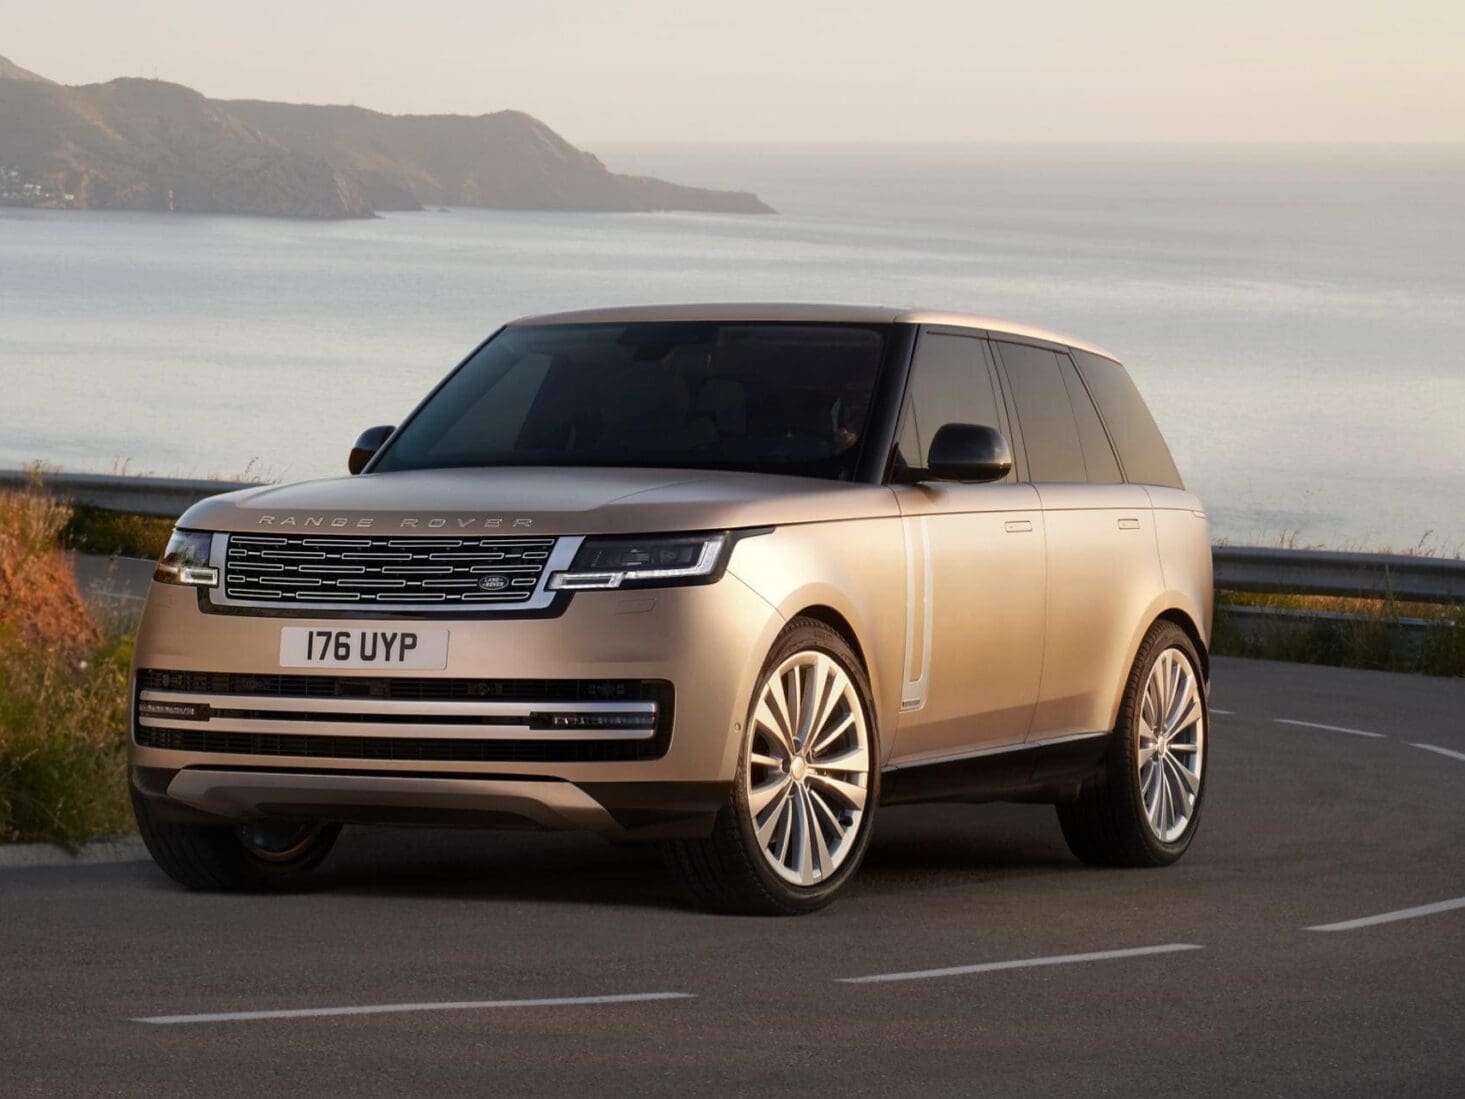 New 2021 Range Rover review